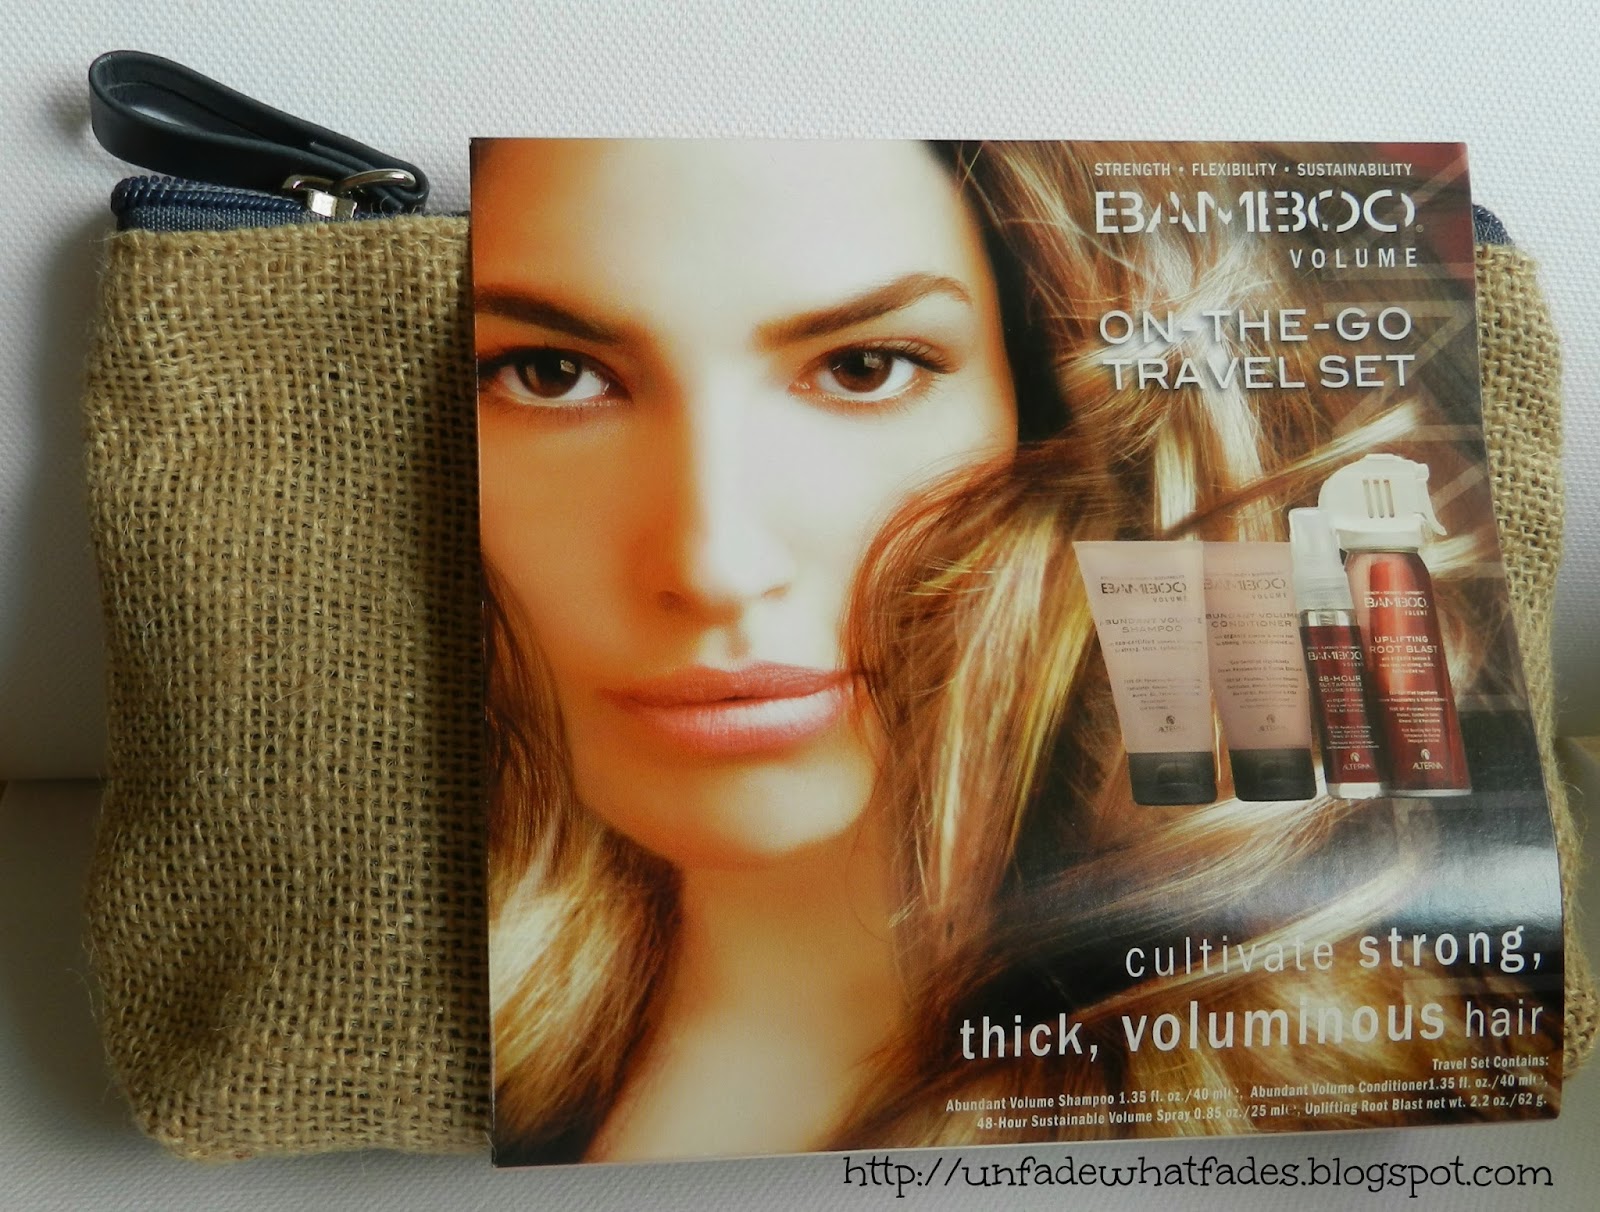 Unfade What Fades Alterna Bamboo Volume On The Go Travel Set Review